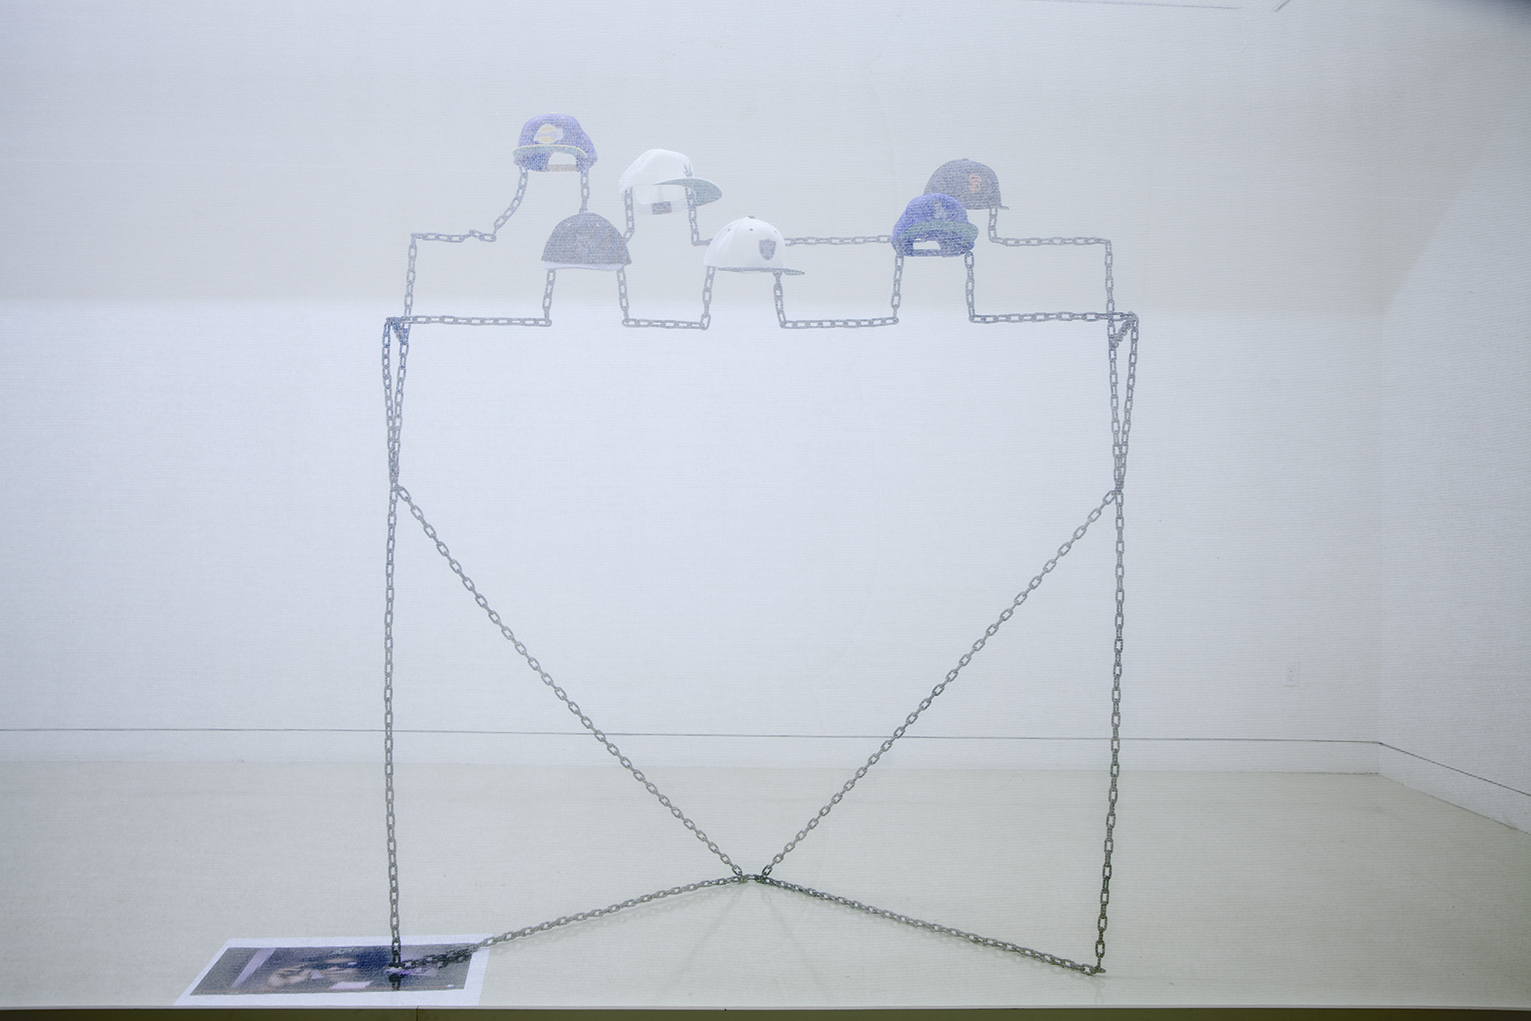  Robin Jiro Margerin  Express yourself (Chain gang)  2014 Six digitally blurred logos embroidered on classic snap-back caps, welded steel chain, color inkjet print Courtesy of the artist 